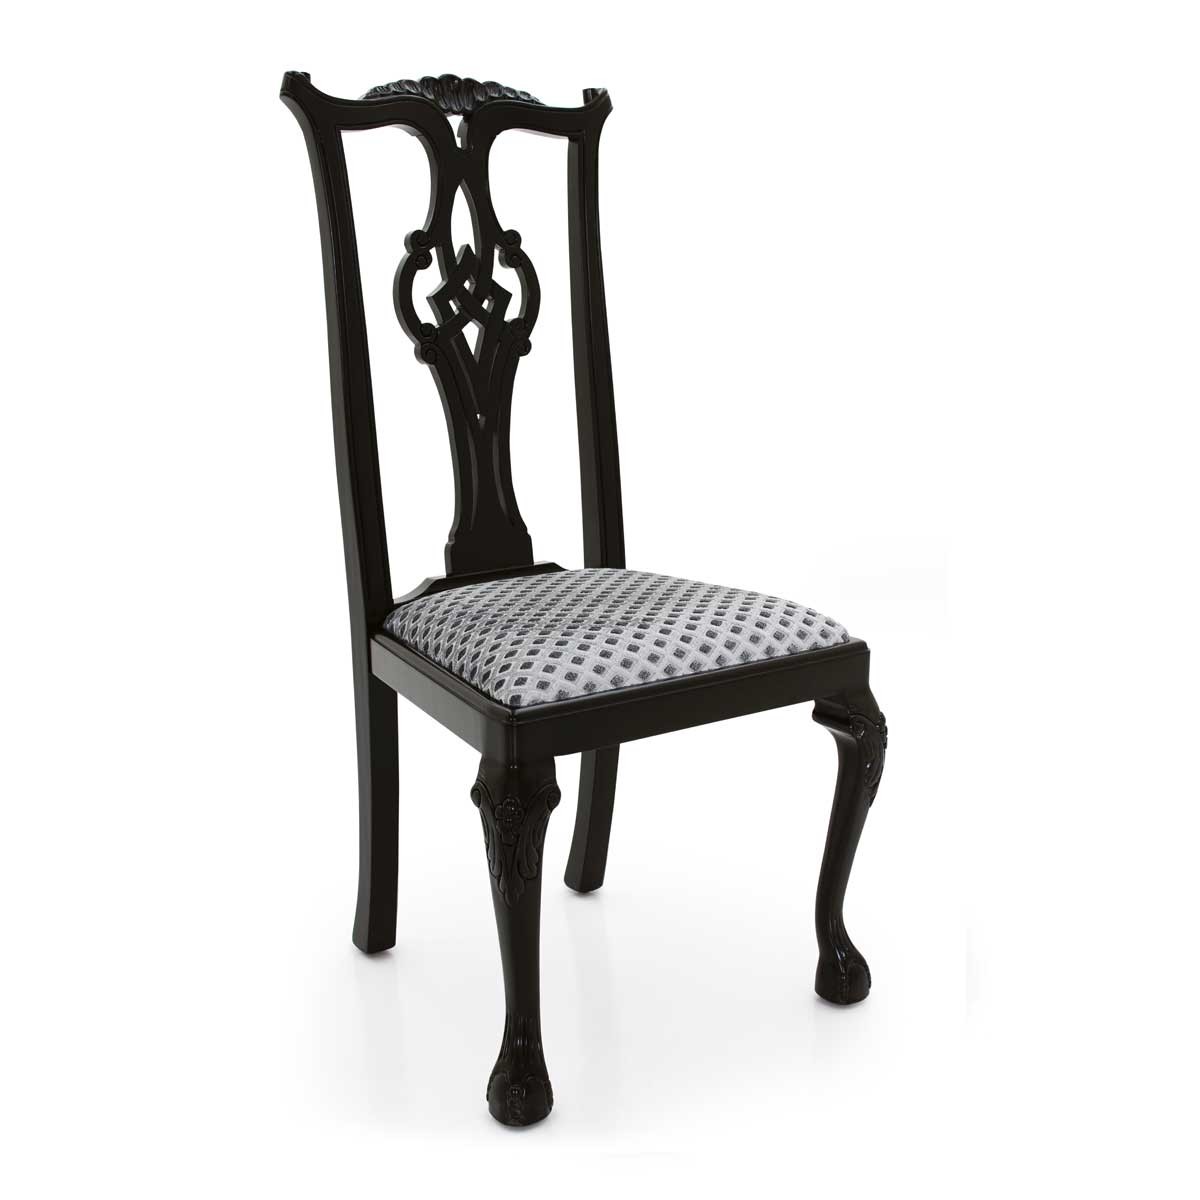 Cippendale black classic chair ROMA with carved wooden back by Sevensedie